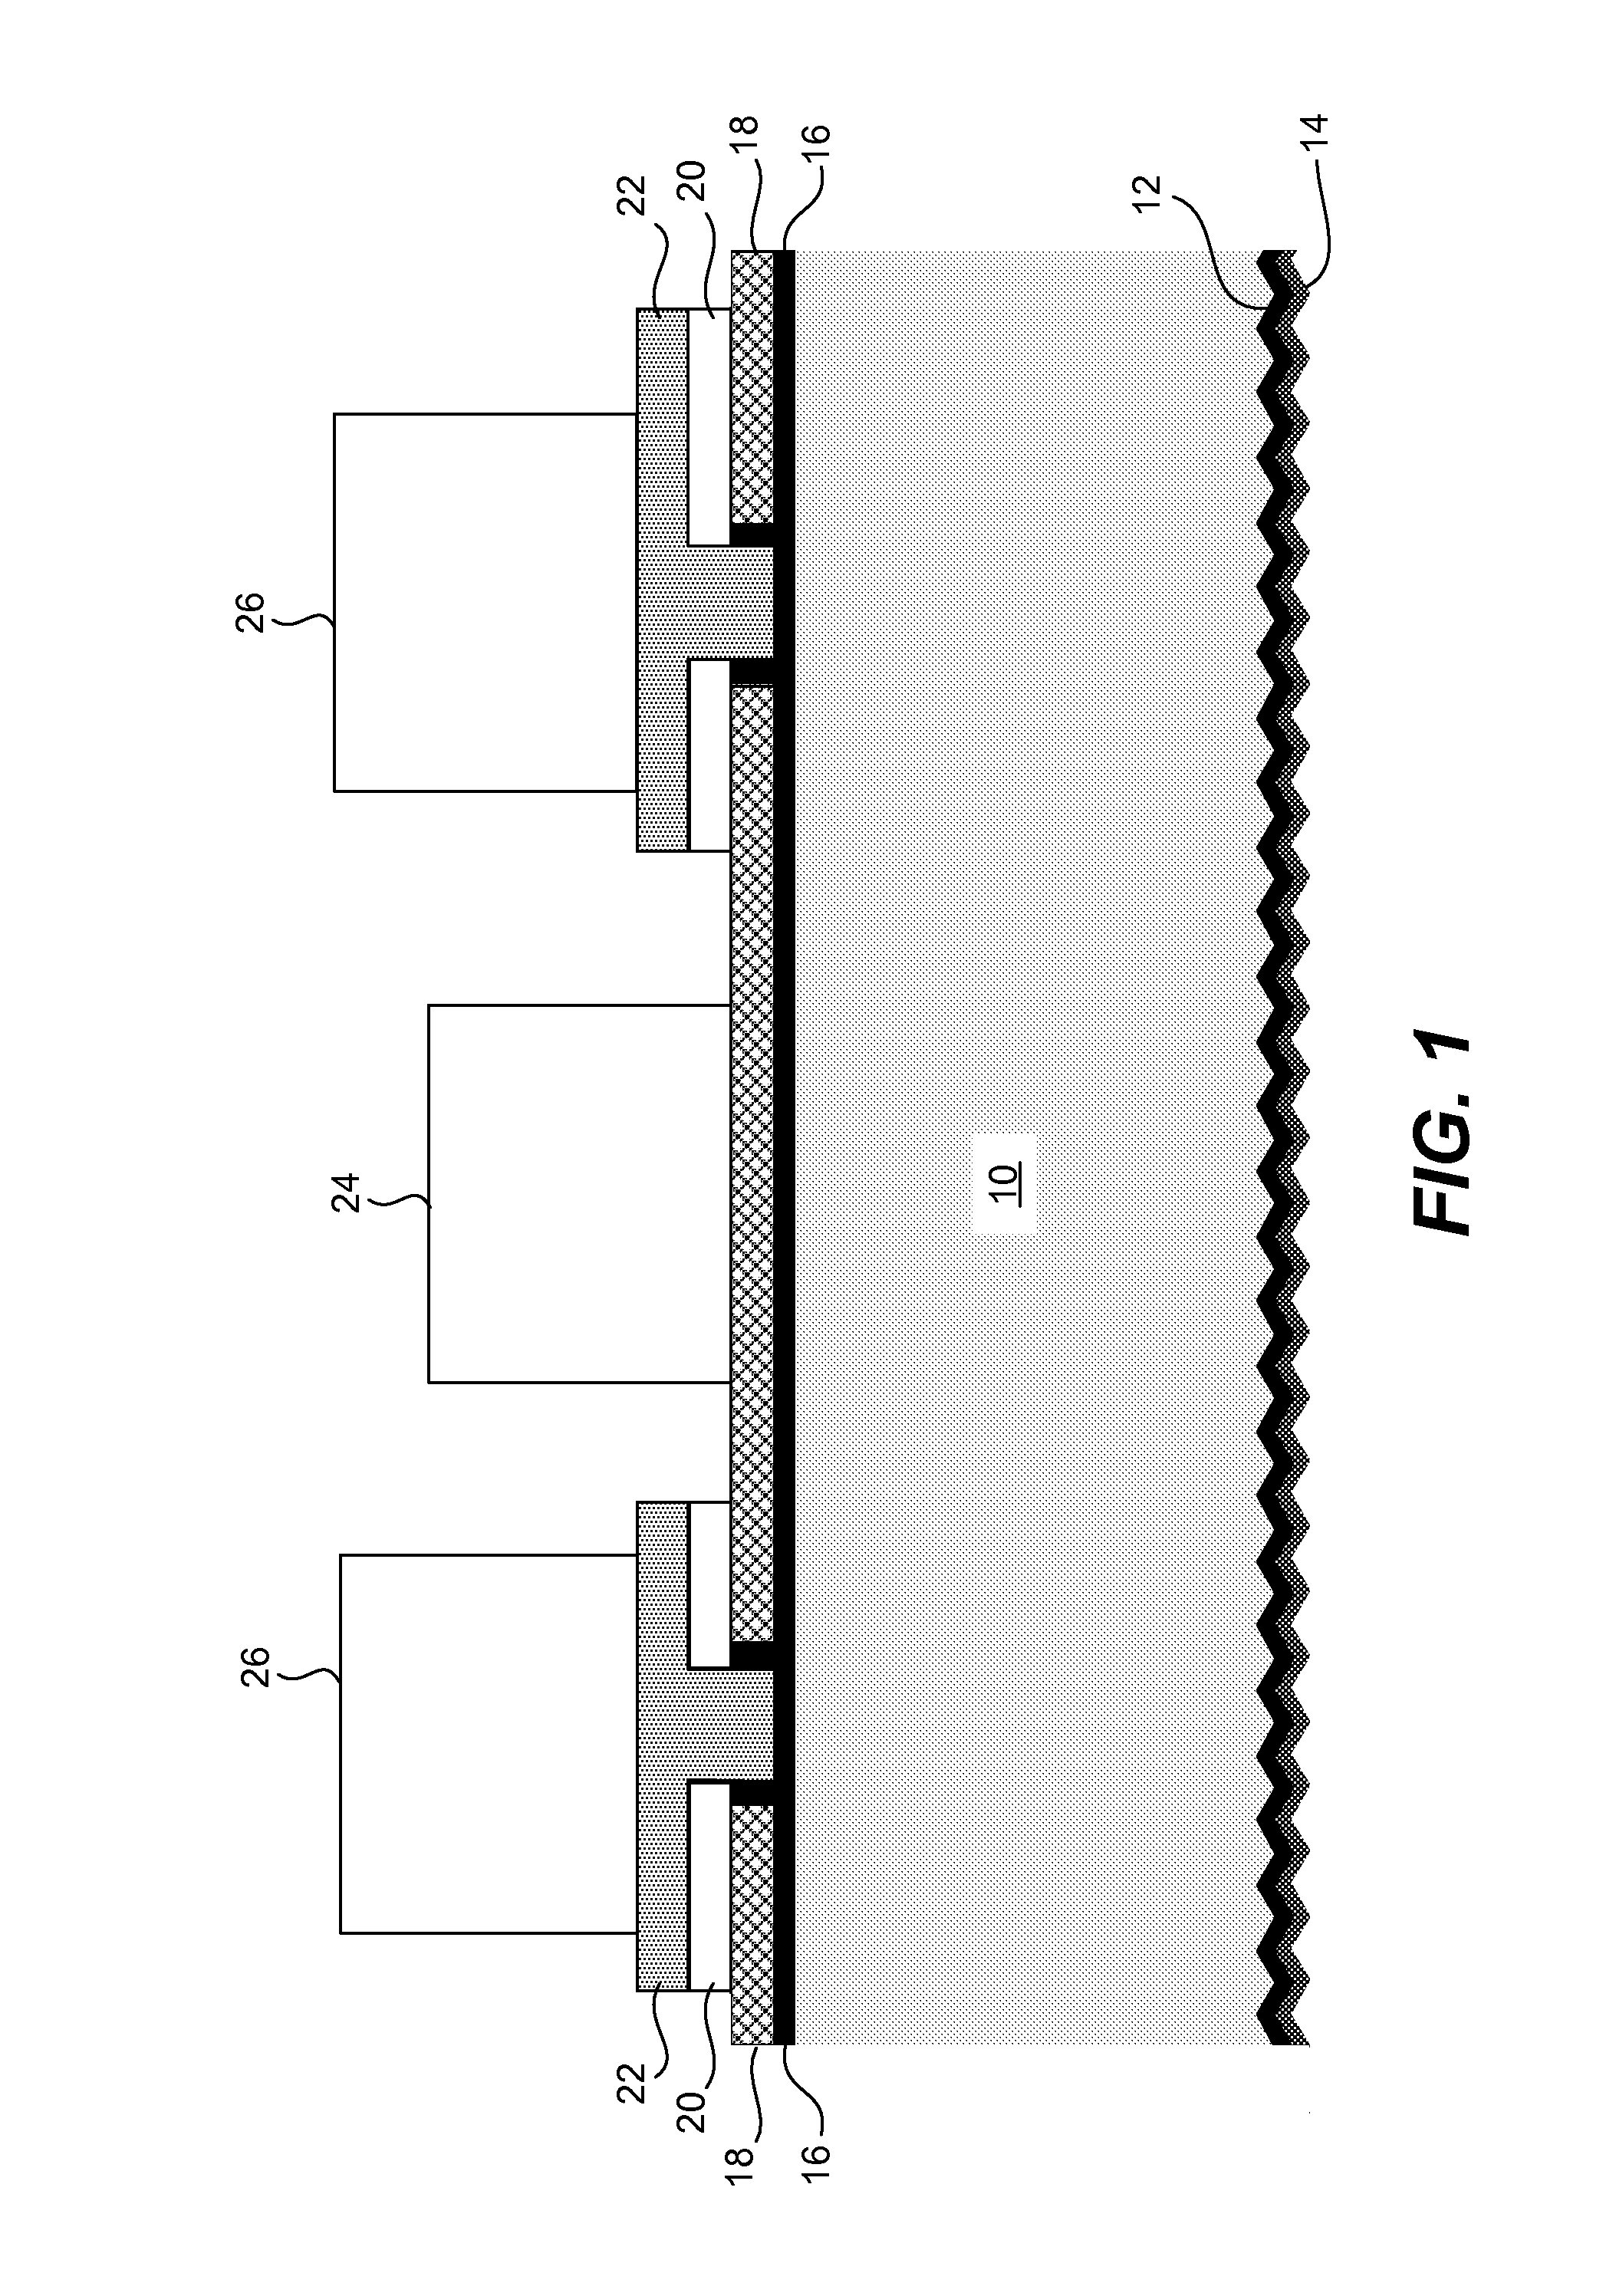 Solar cell having doped semiconductor heterojunction contacts